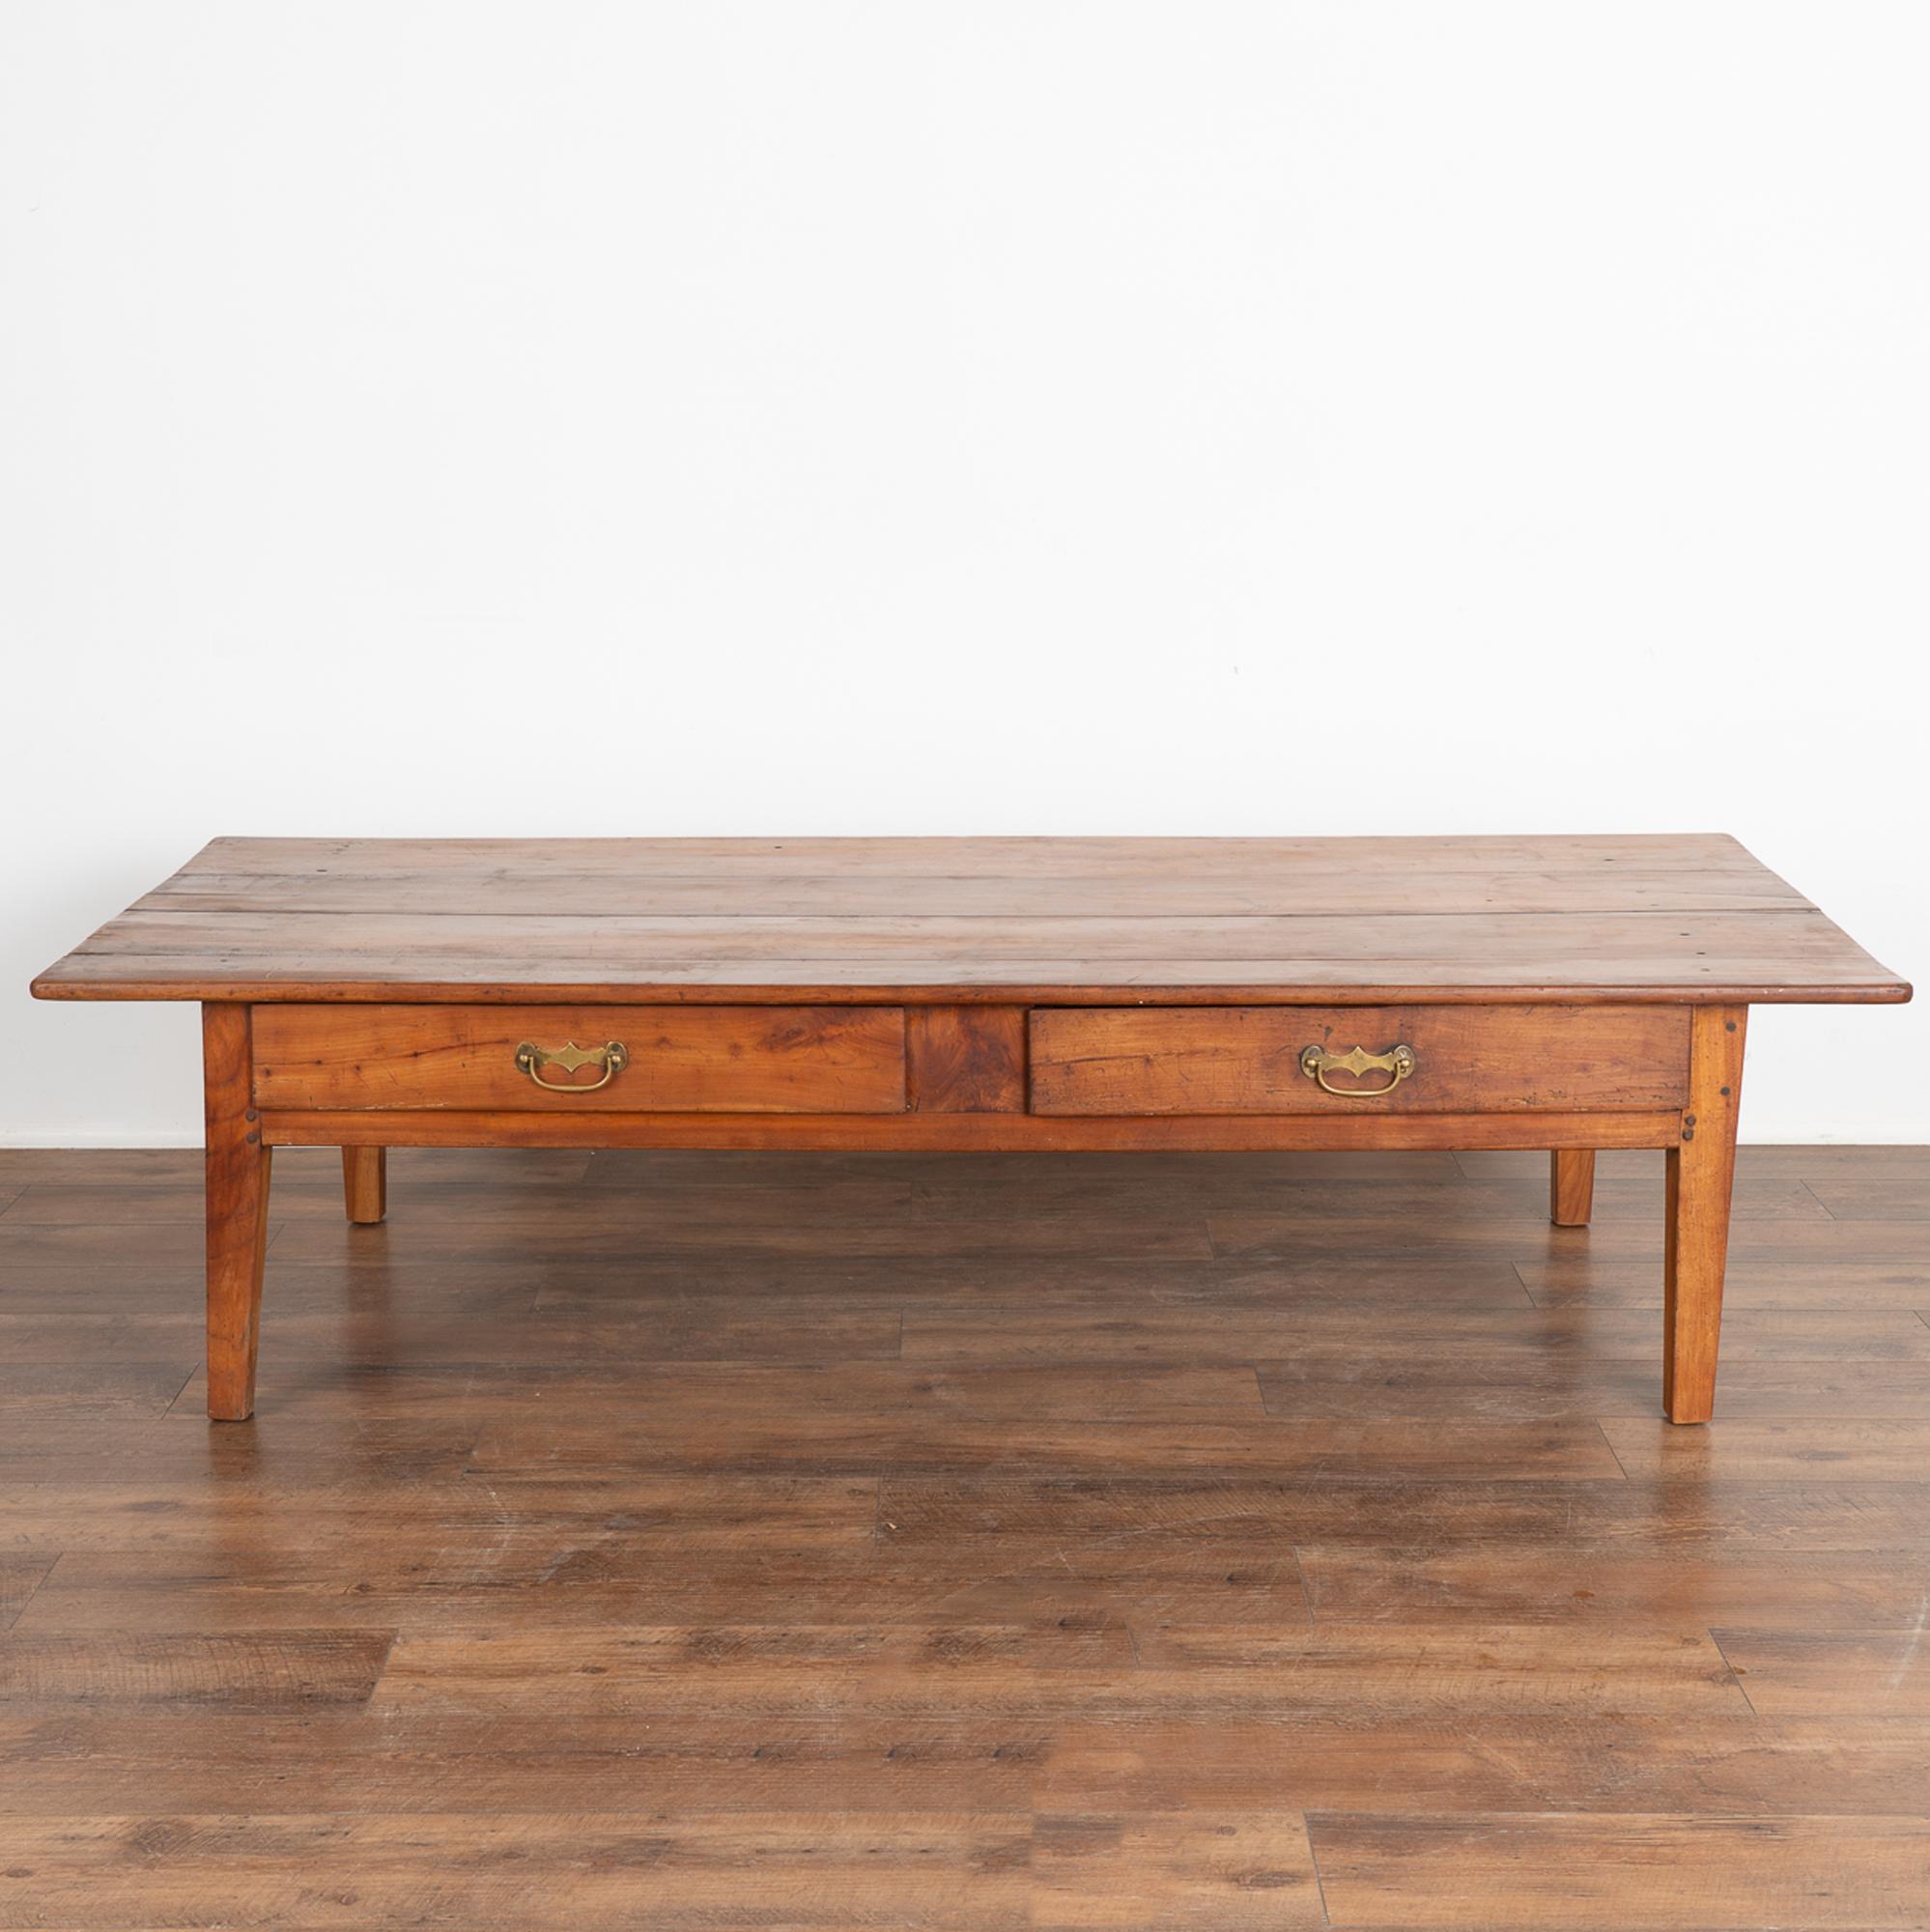 19th Century Large French Country Cherry Wood Coffee Table, circa 1820-40